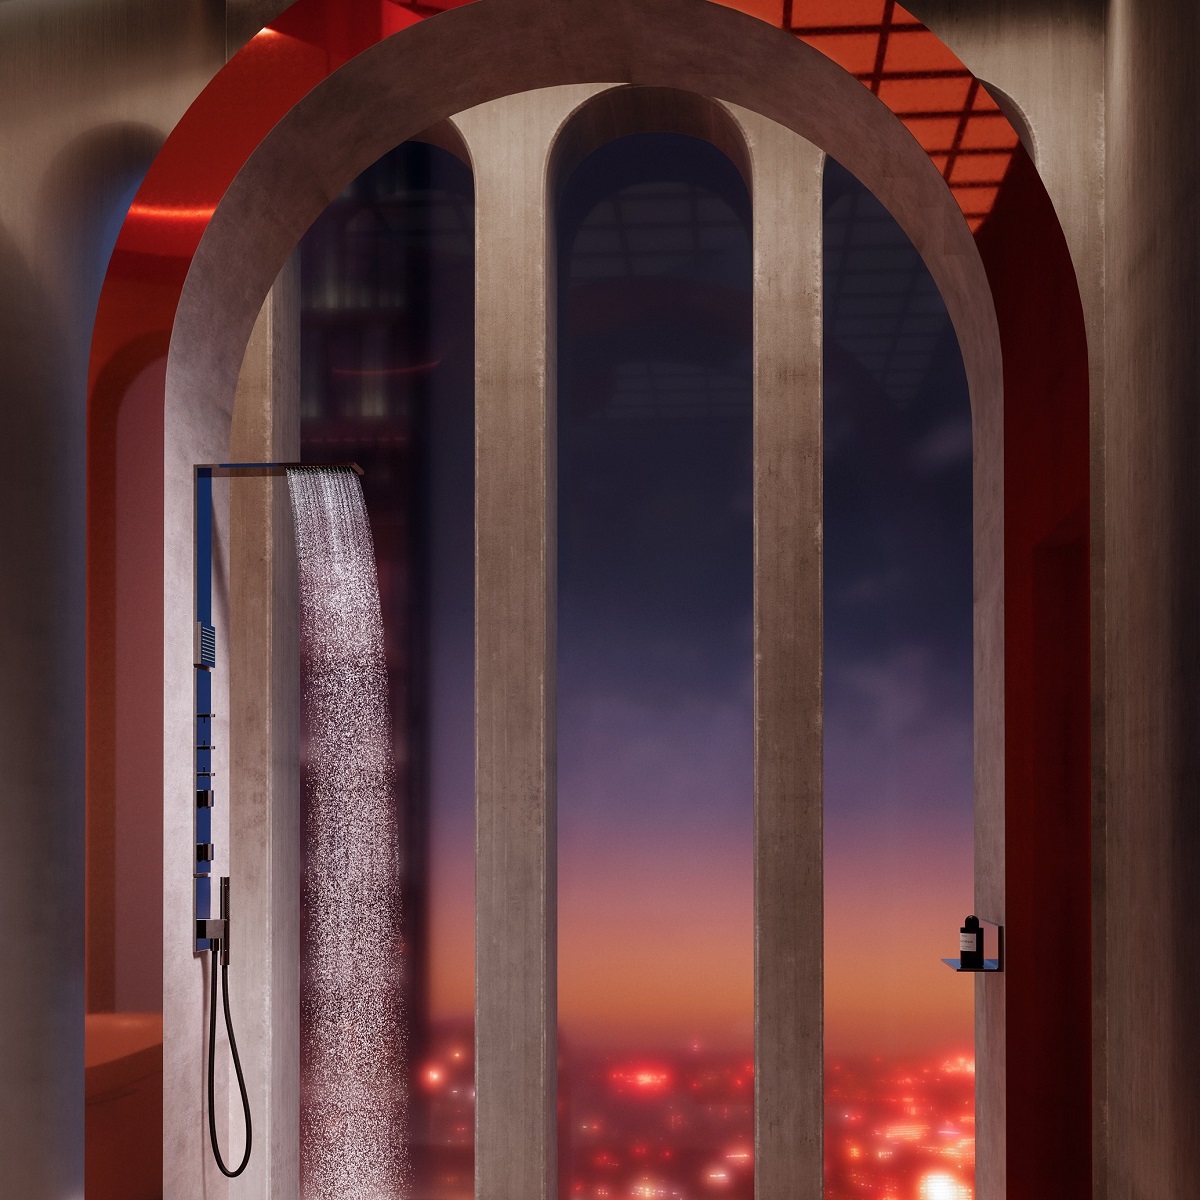 black shower fitting in front of arched window looking out over city lights